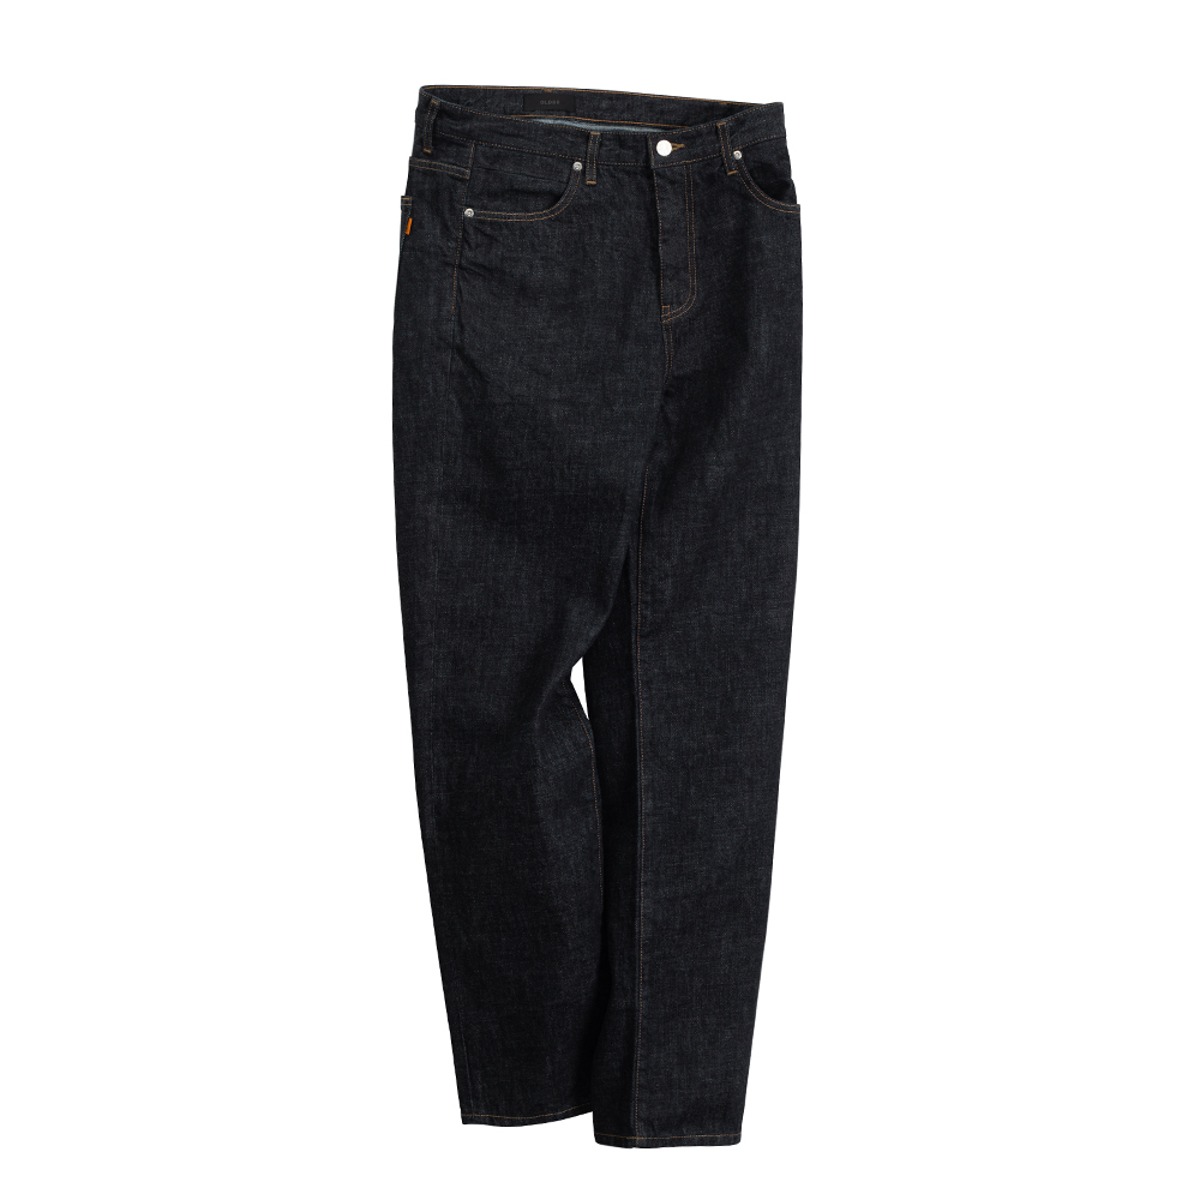  TYPE4 STRAIGHT JEANS R1